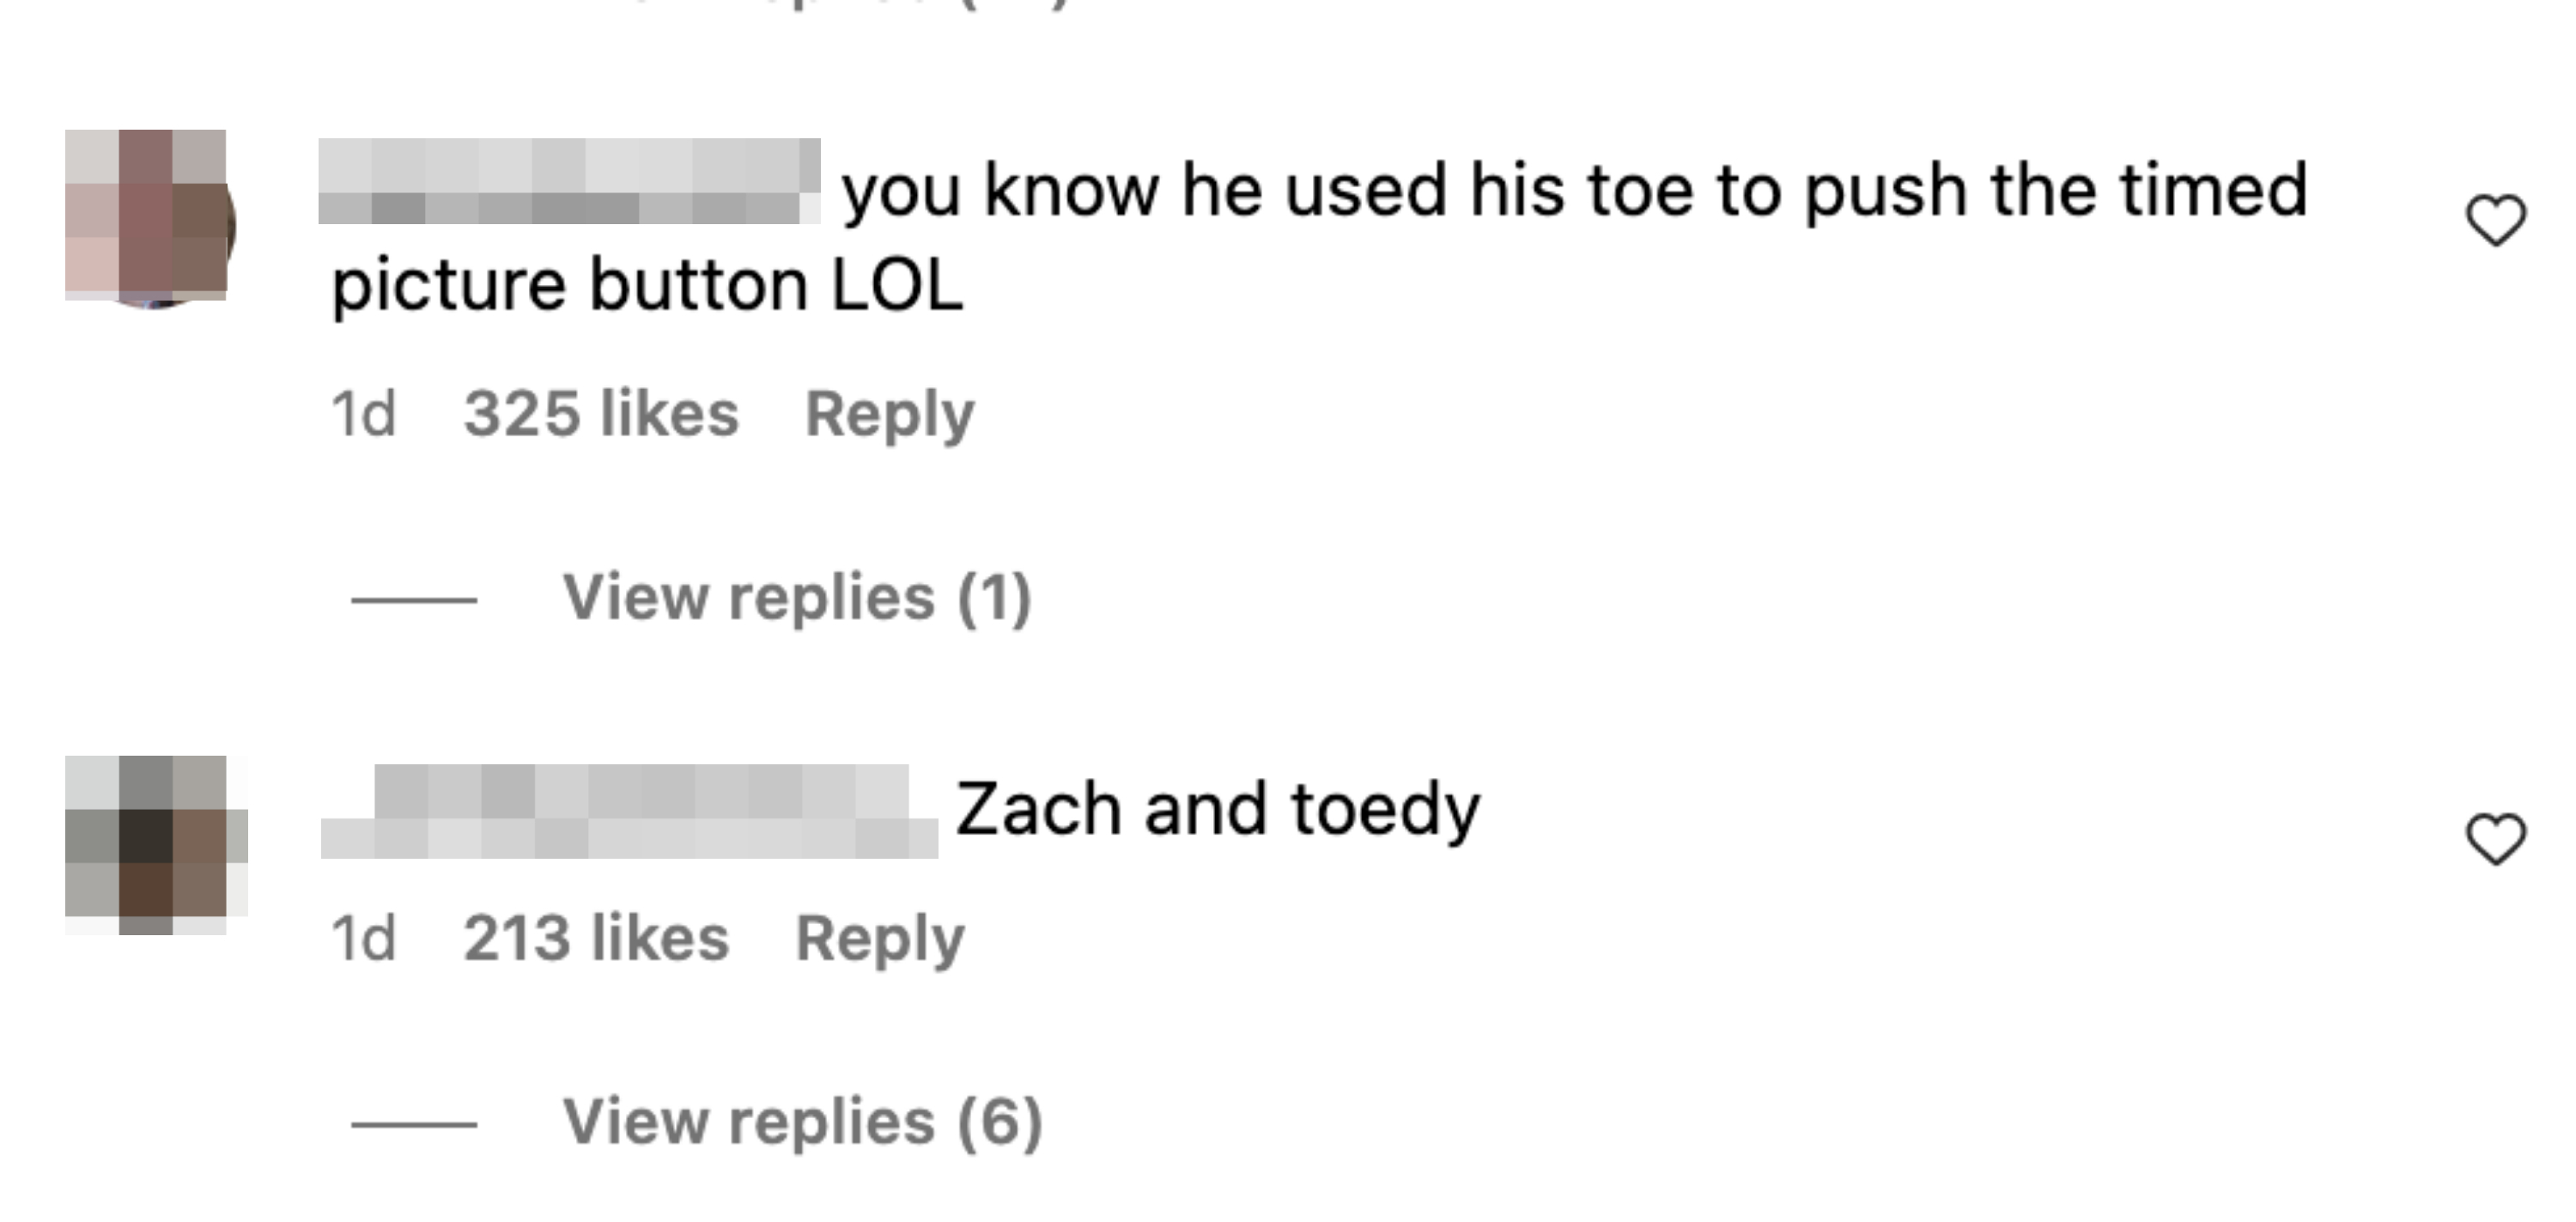 &quot;Zach and toedy&quot;